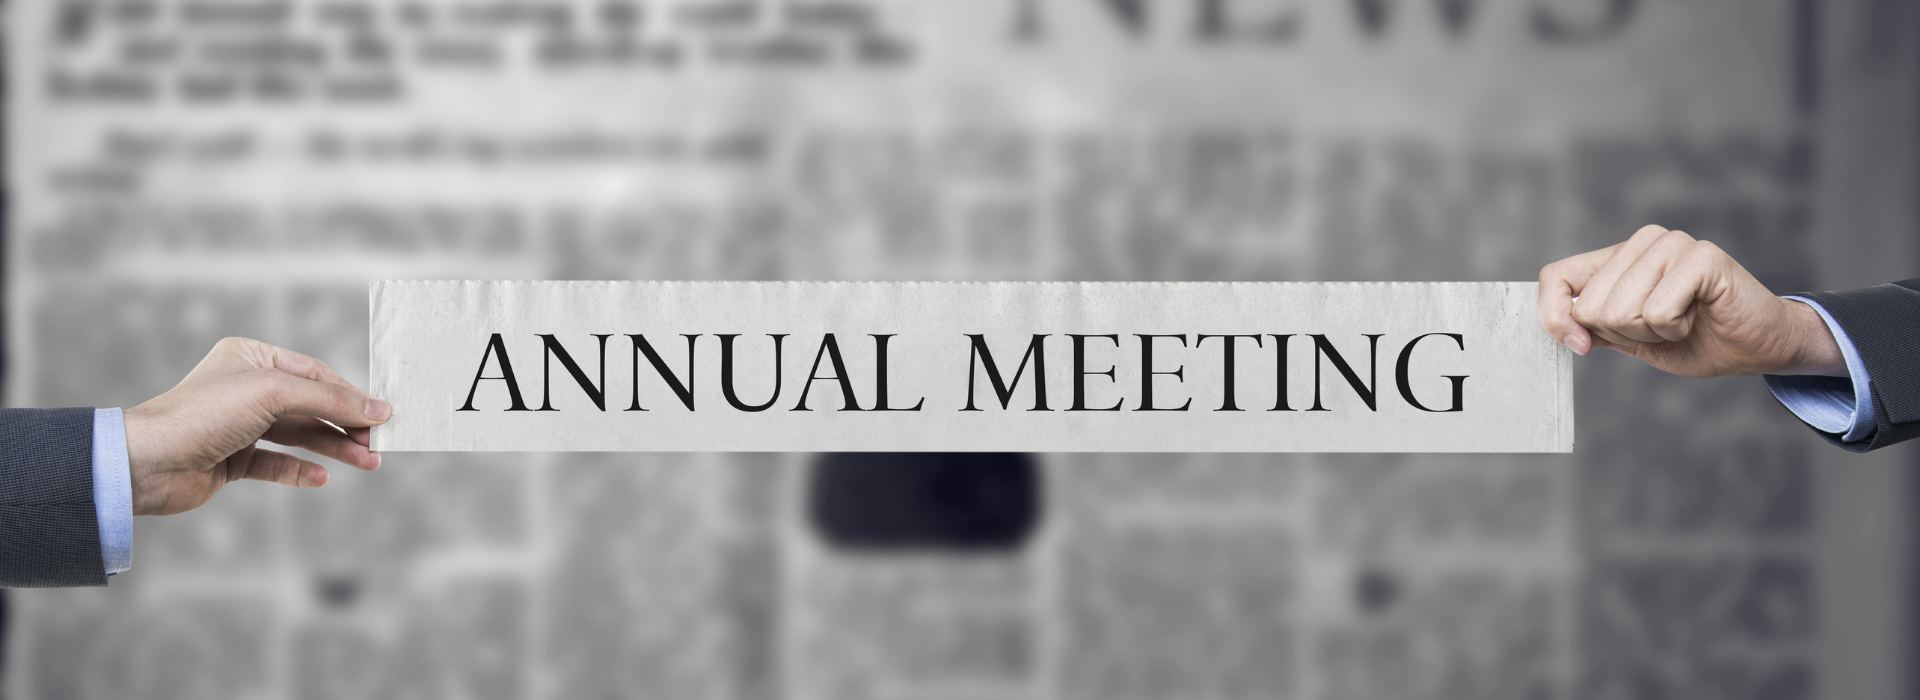 Annual Meeting - landing page.png